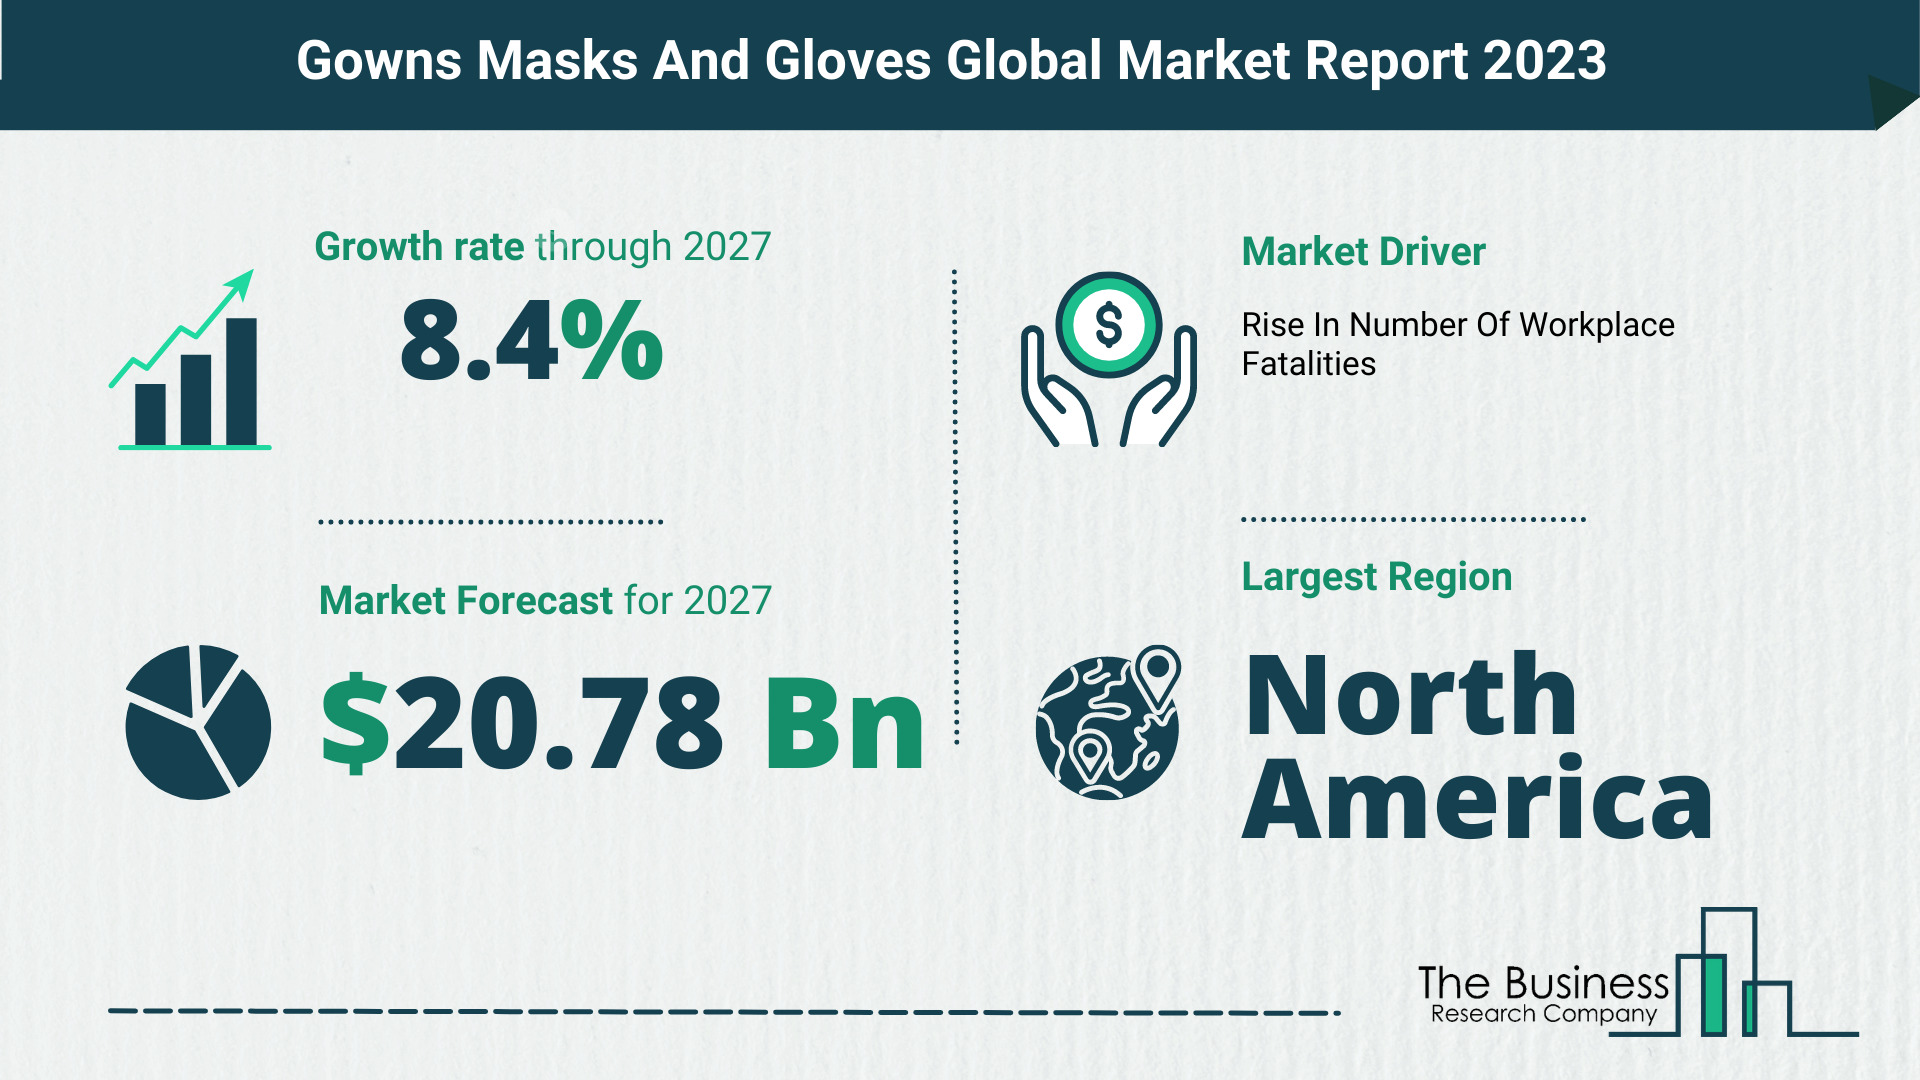 Global Gowns Masks And Gloves Market Opportunities And Strategies 2023